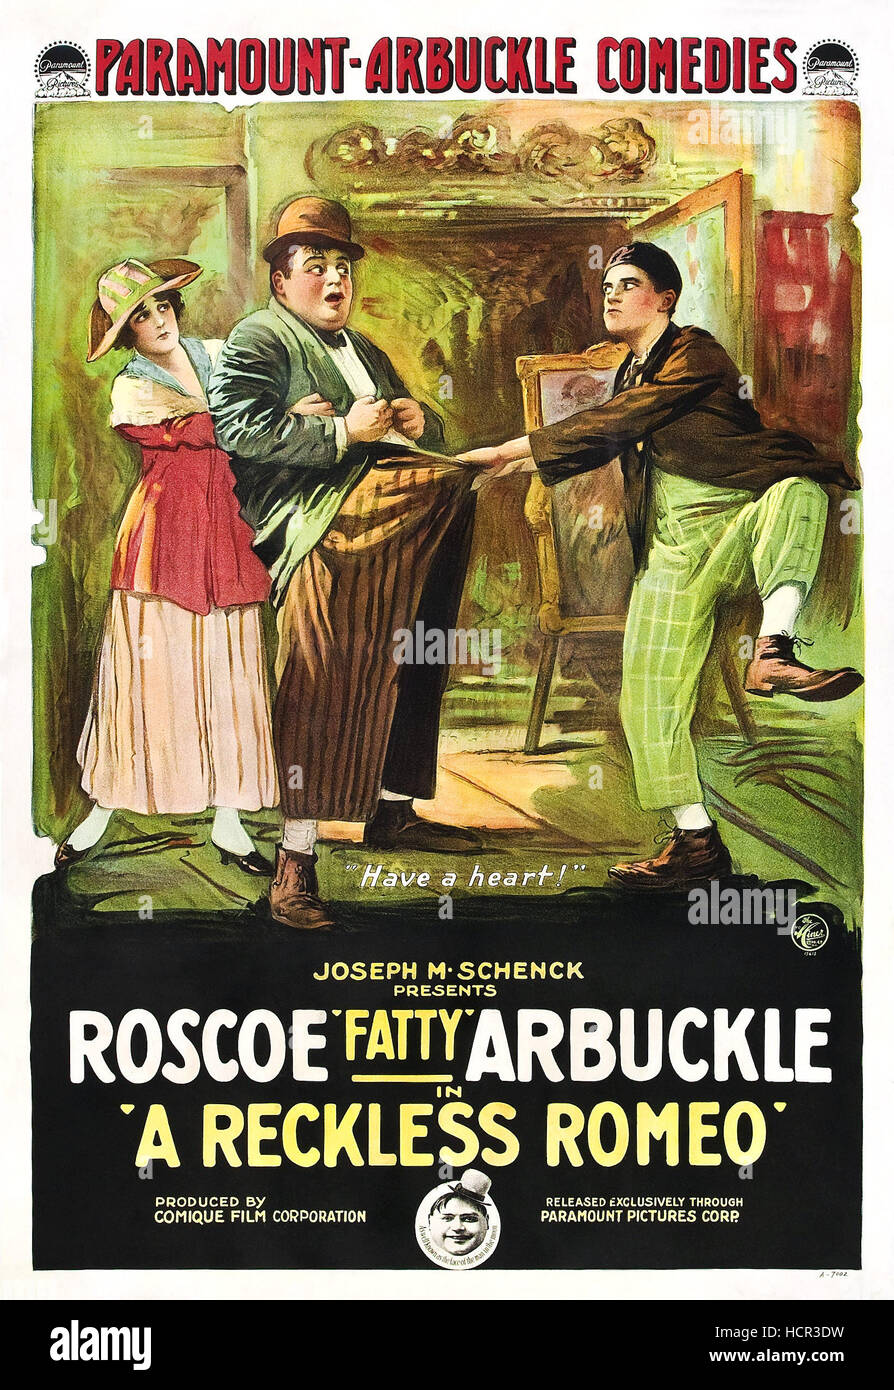 A RECKLESS ROMEO, center: Roscoe 'Fatty' Arbuckle on poster art, 1917. Stock Photo